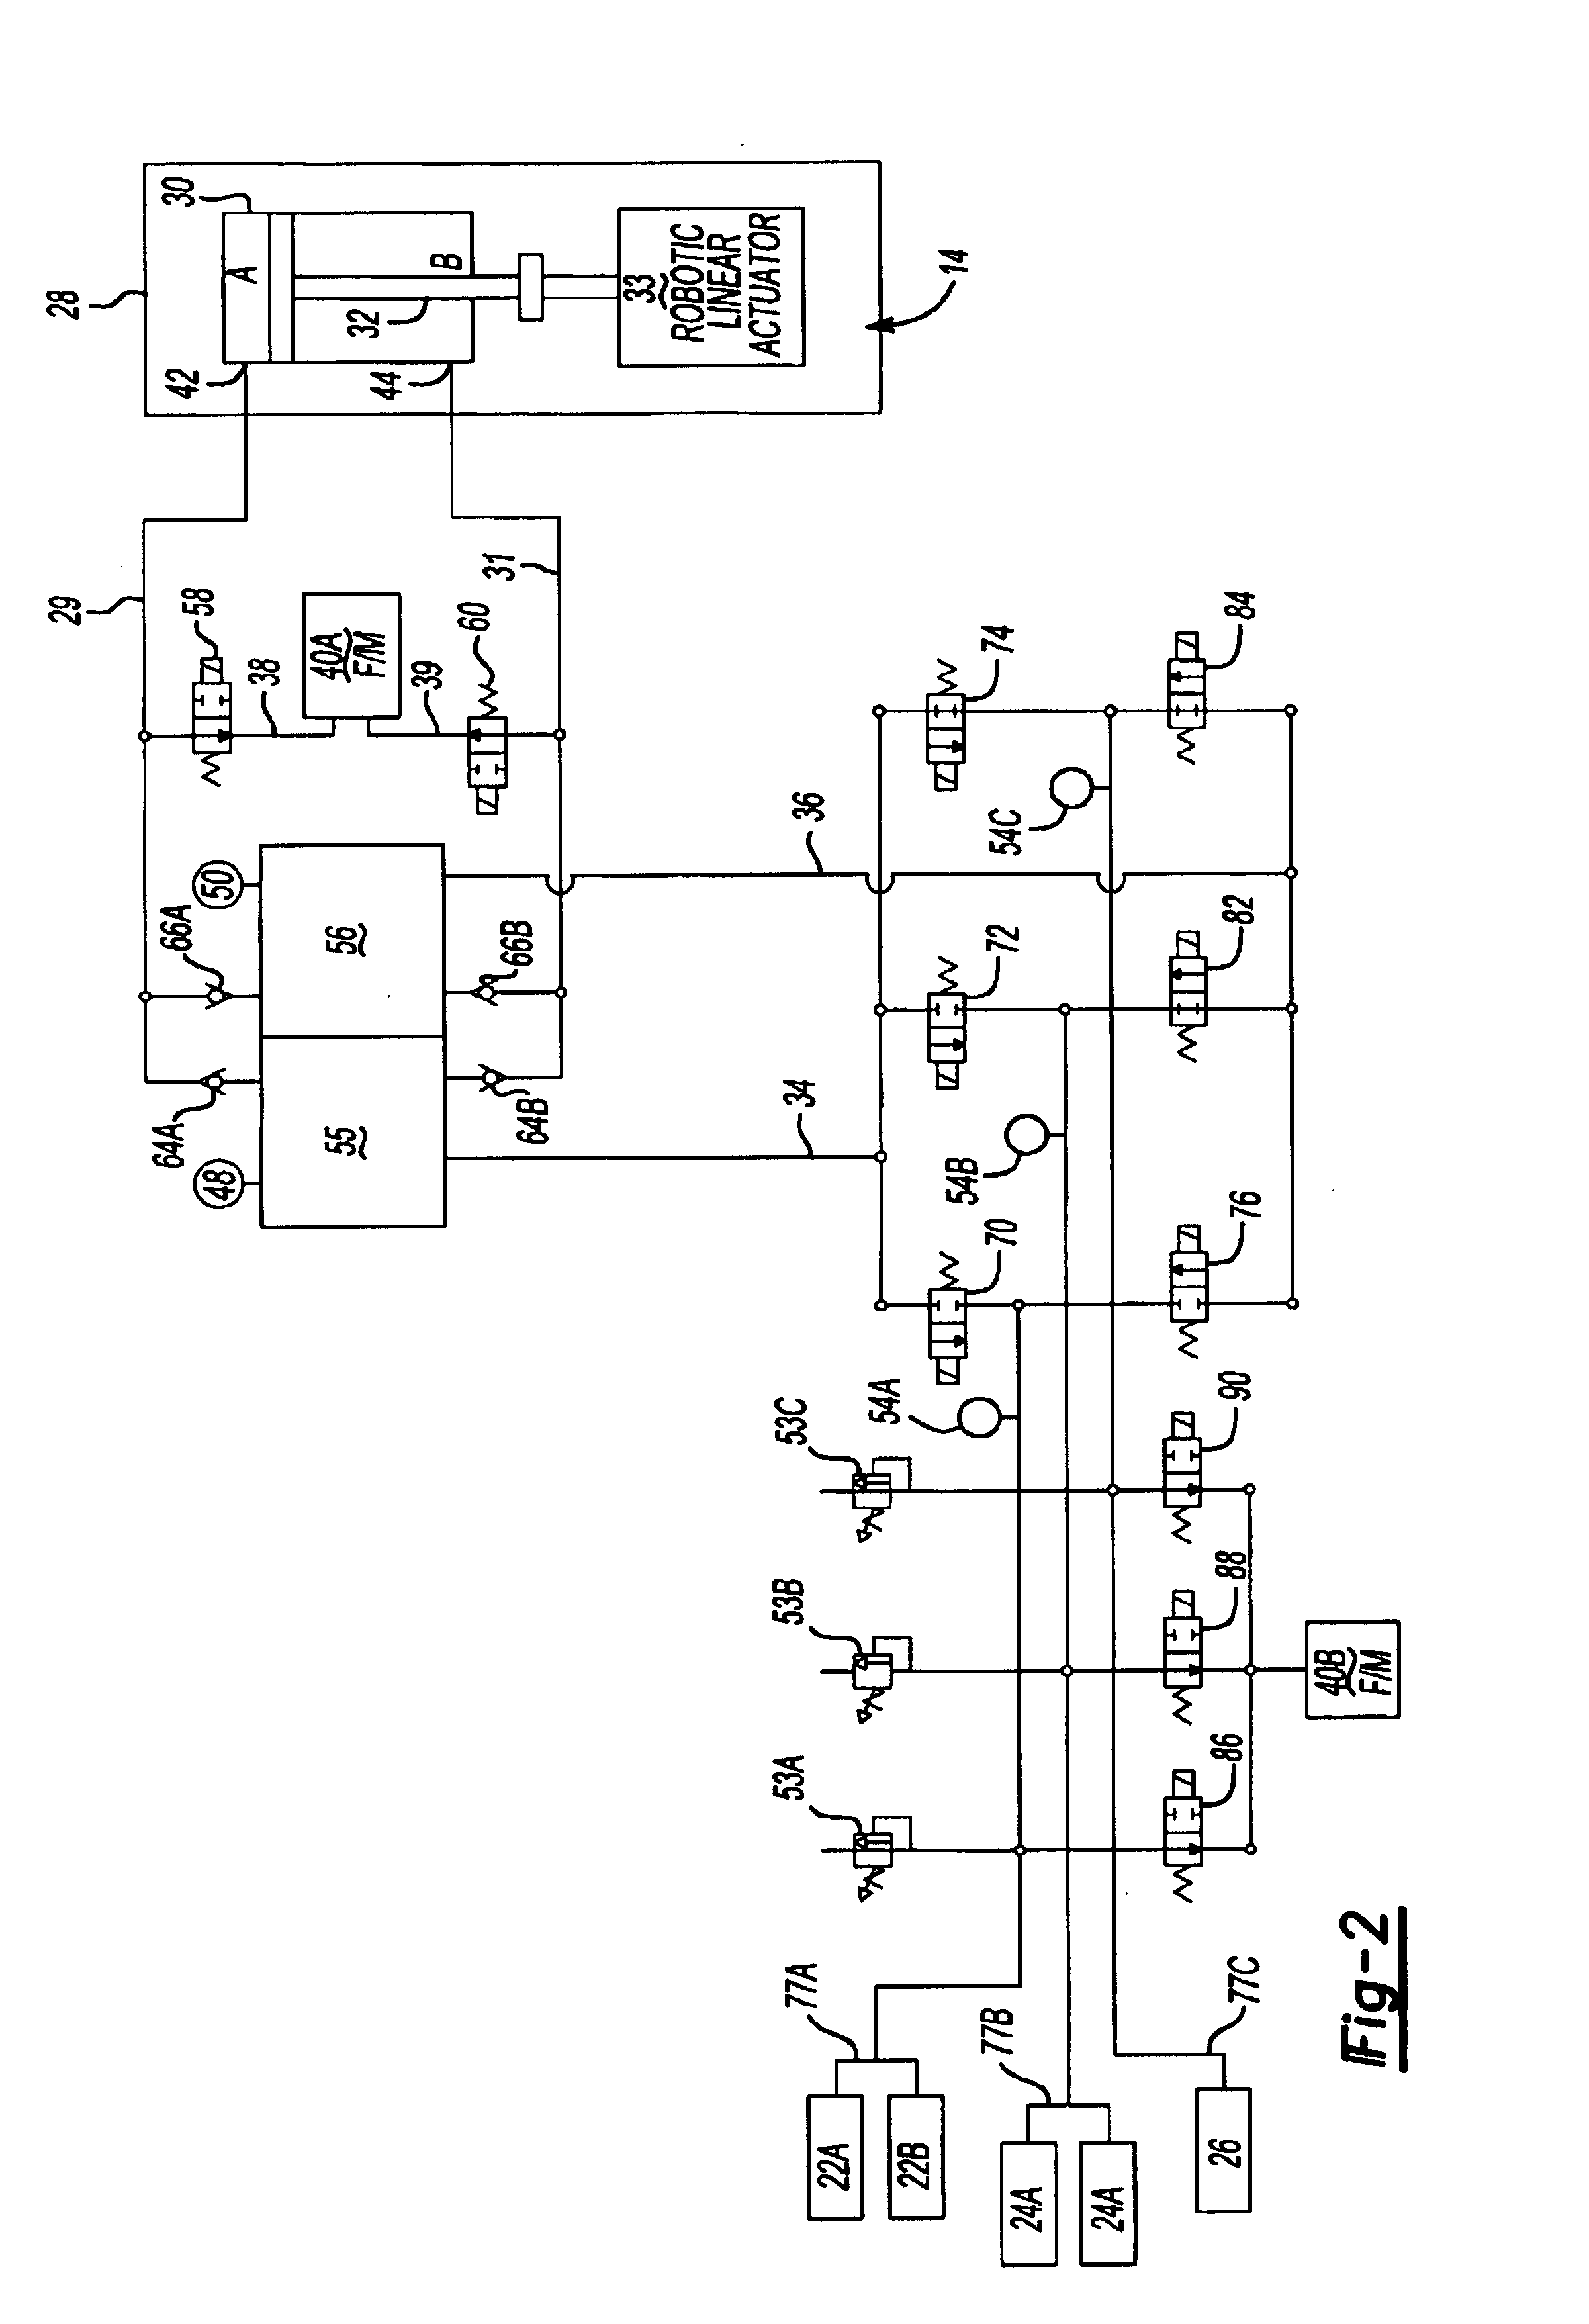 Computer-based control for a counterpulsation device using noncompressed air